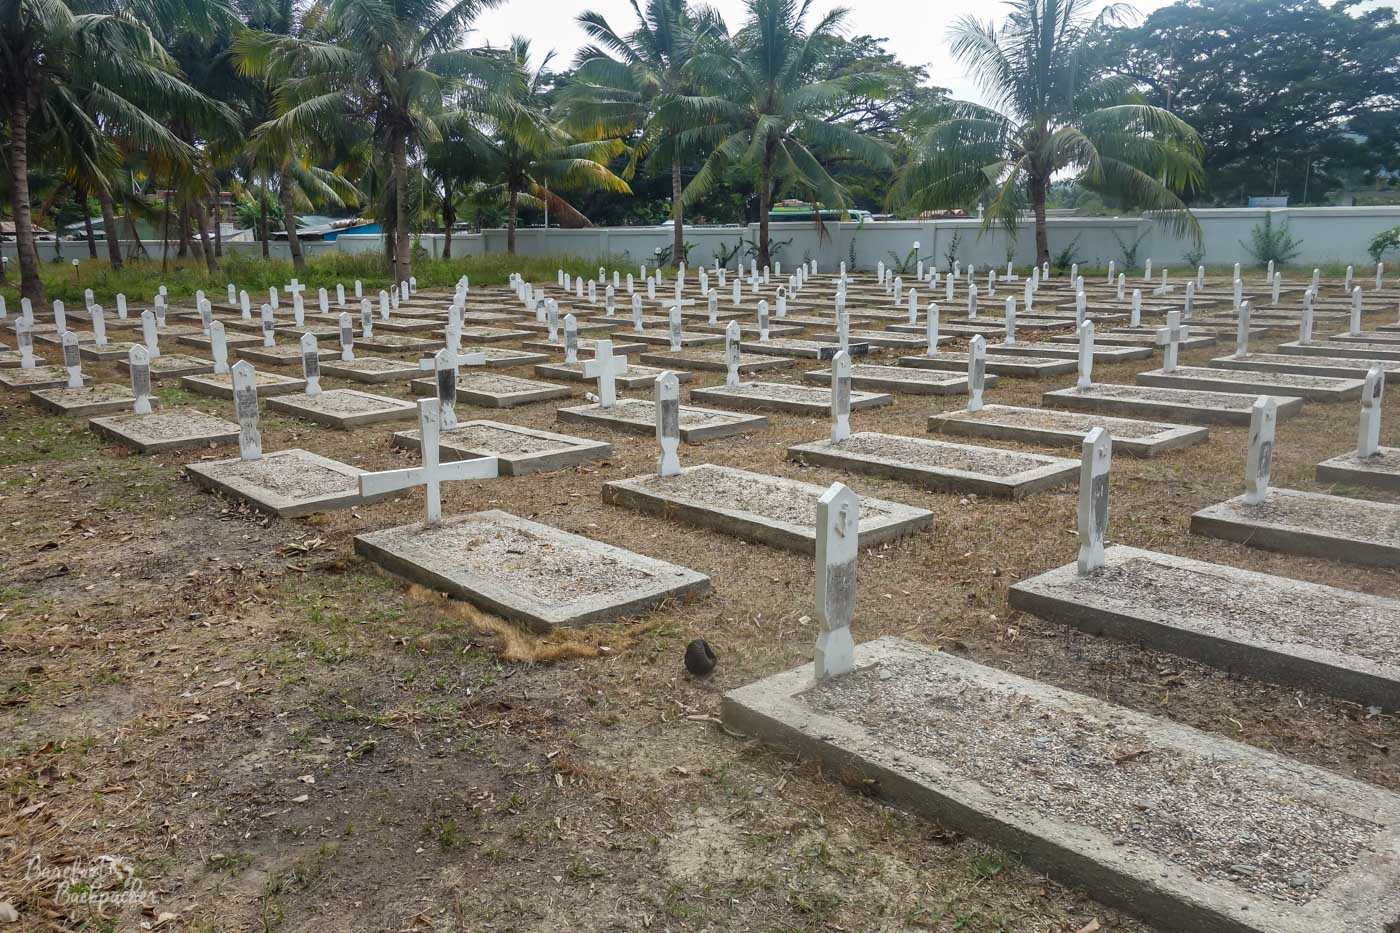 A graveyard in Dili, part of Santa Cruz cemetery. Each grave is a simple rectangular slab of stone with a plain cross at one end.